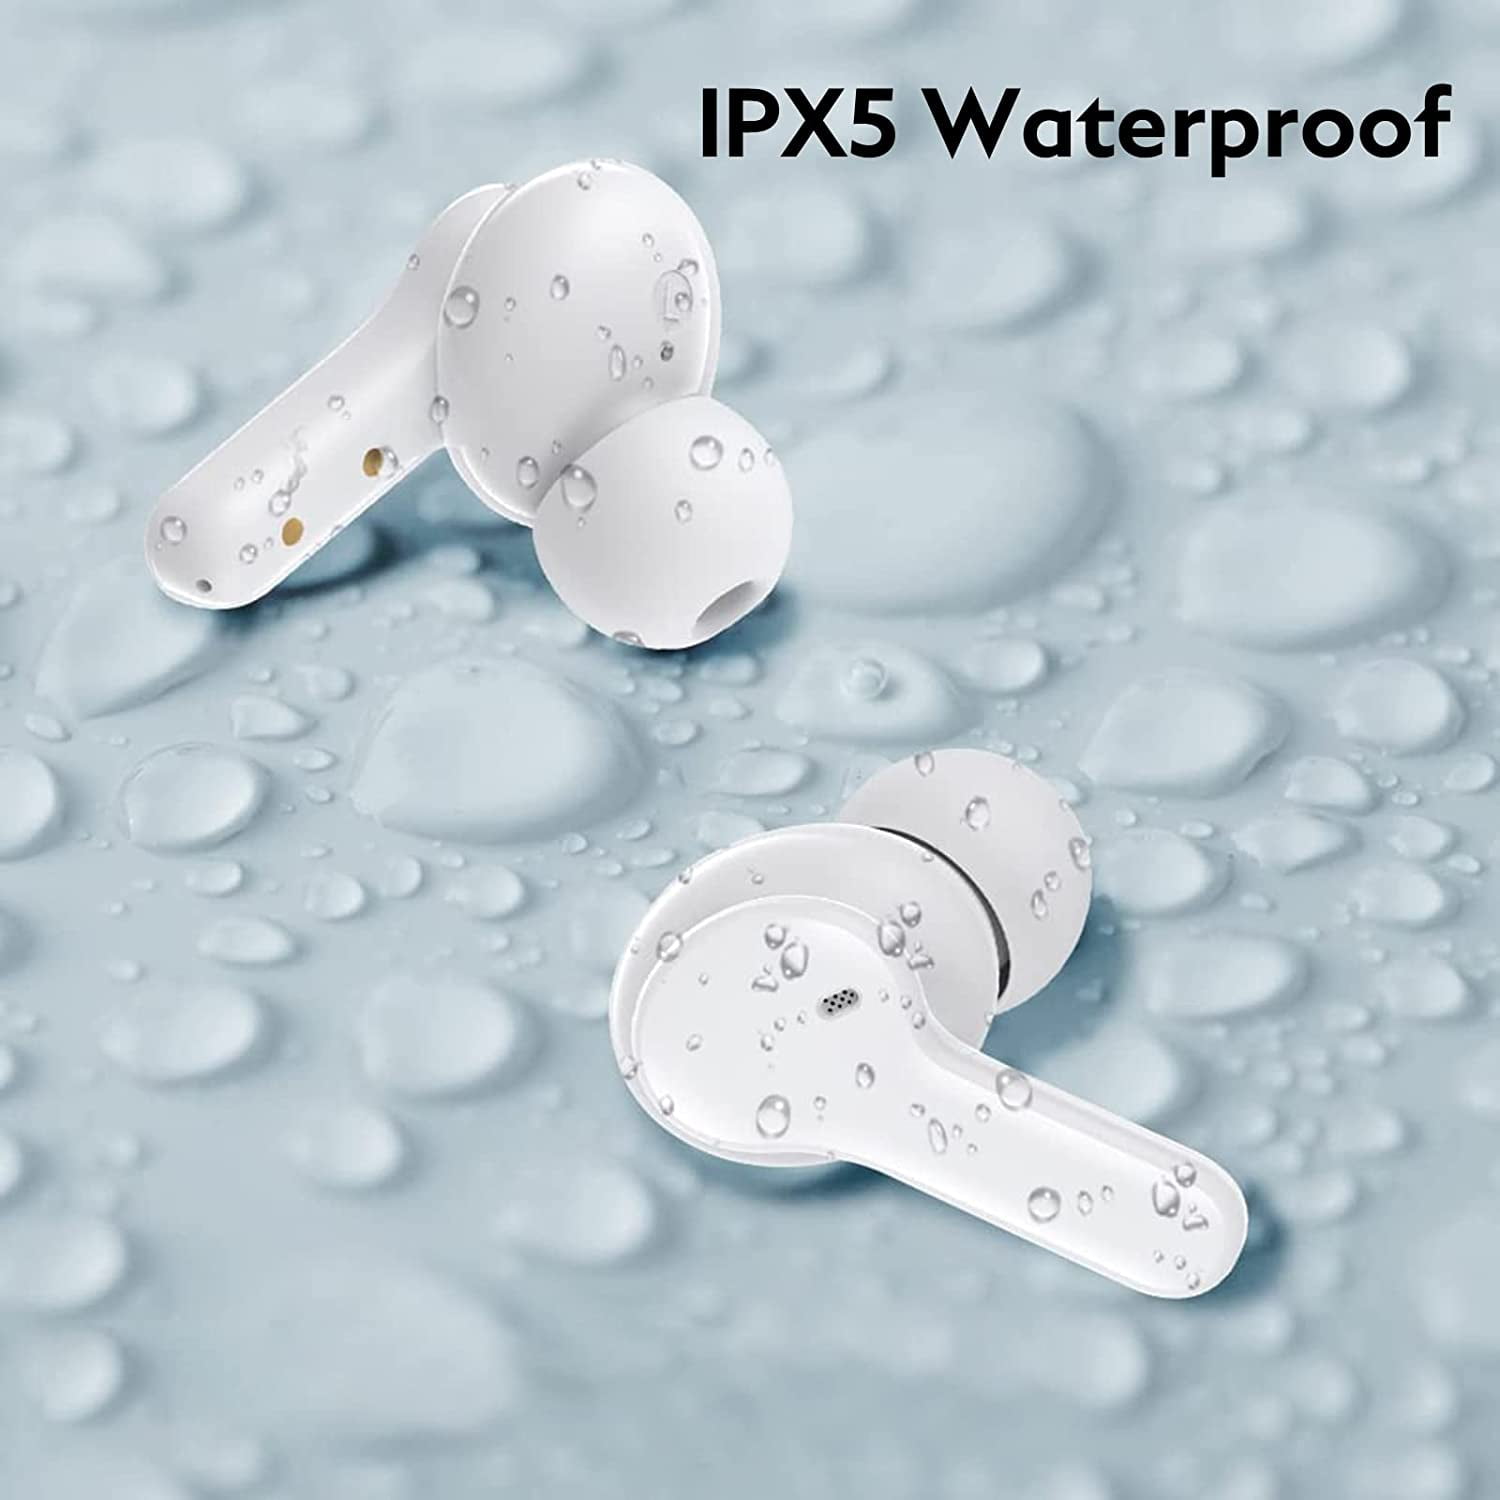 QCY T13 Wireless Earbuds Bluetooth 5.1 Headphones Touch Control with  Charging Case, 40H Playtime, IPX5 Waterproof Stereo Earphones 